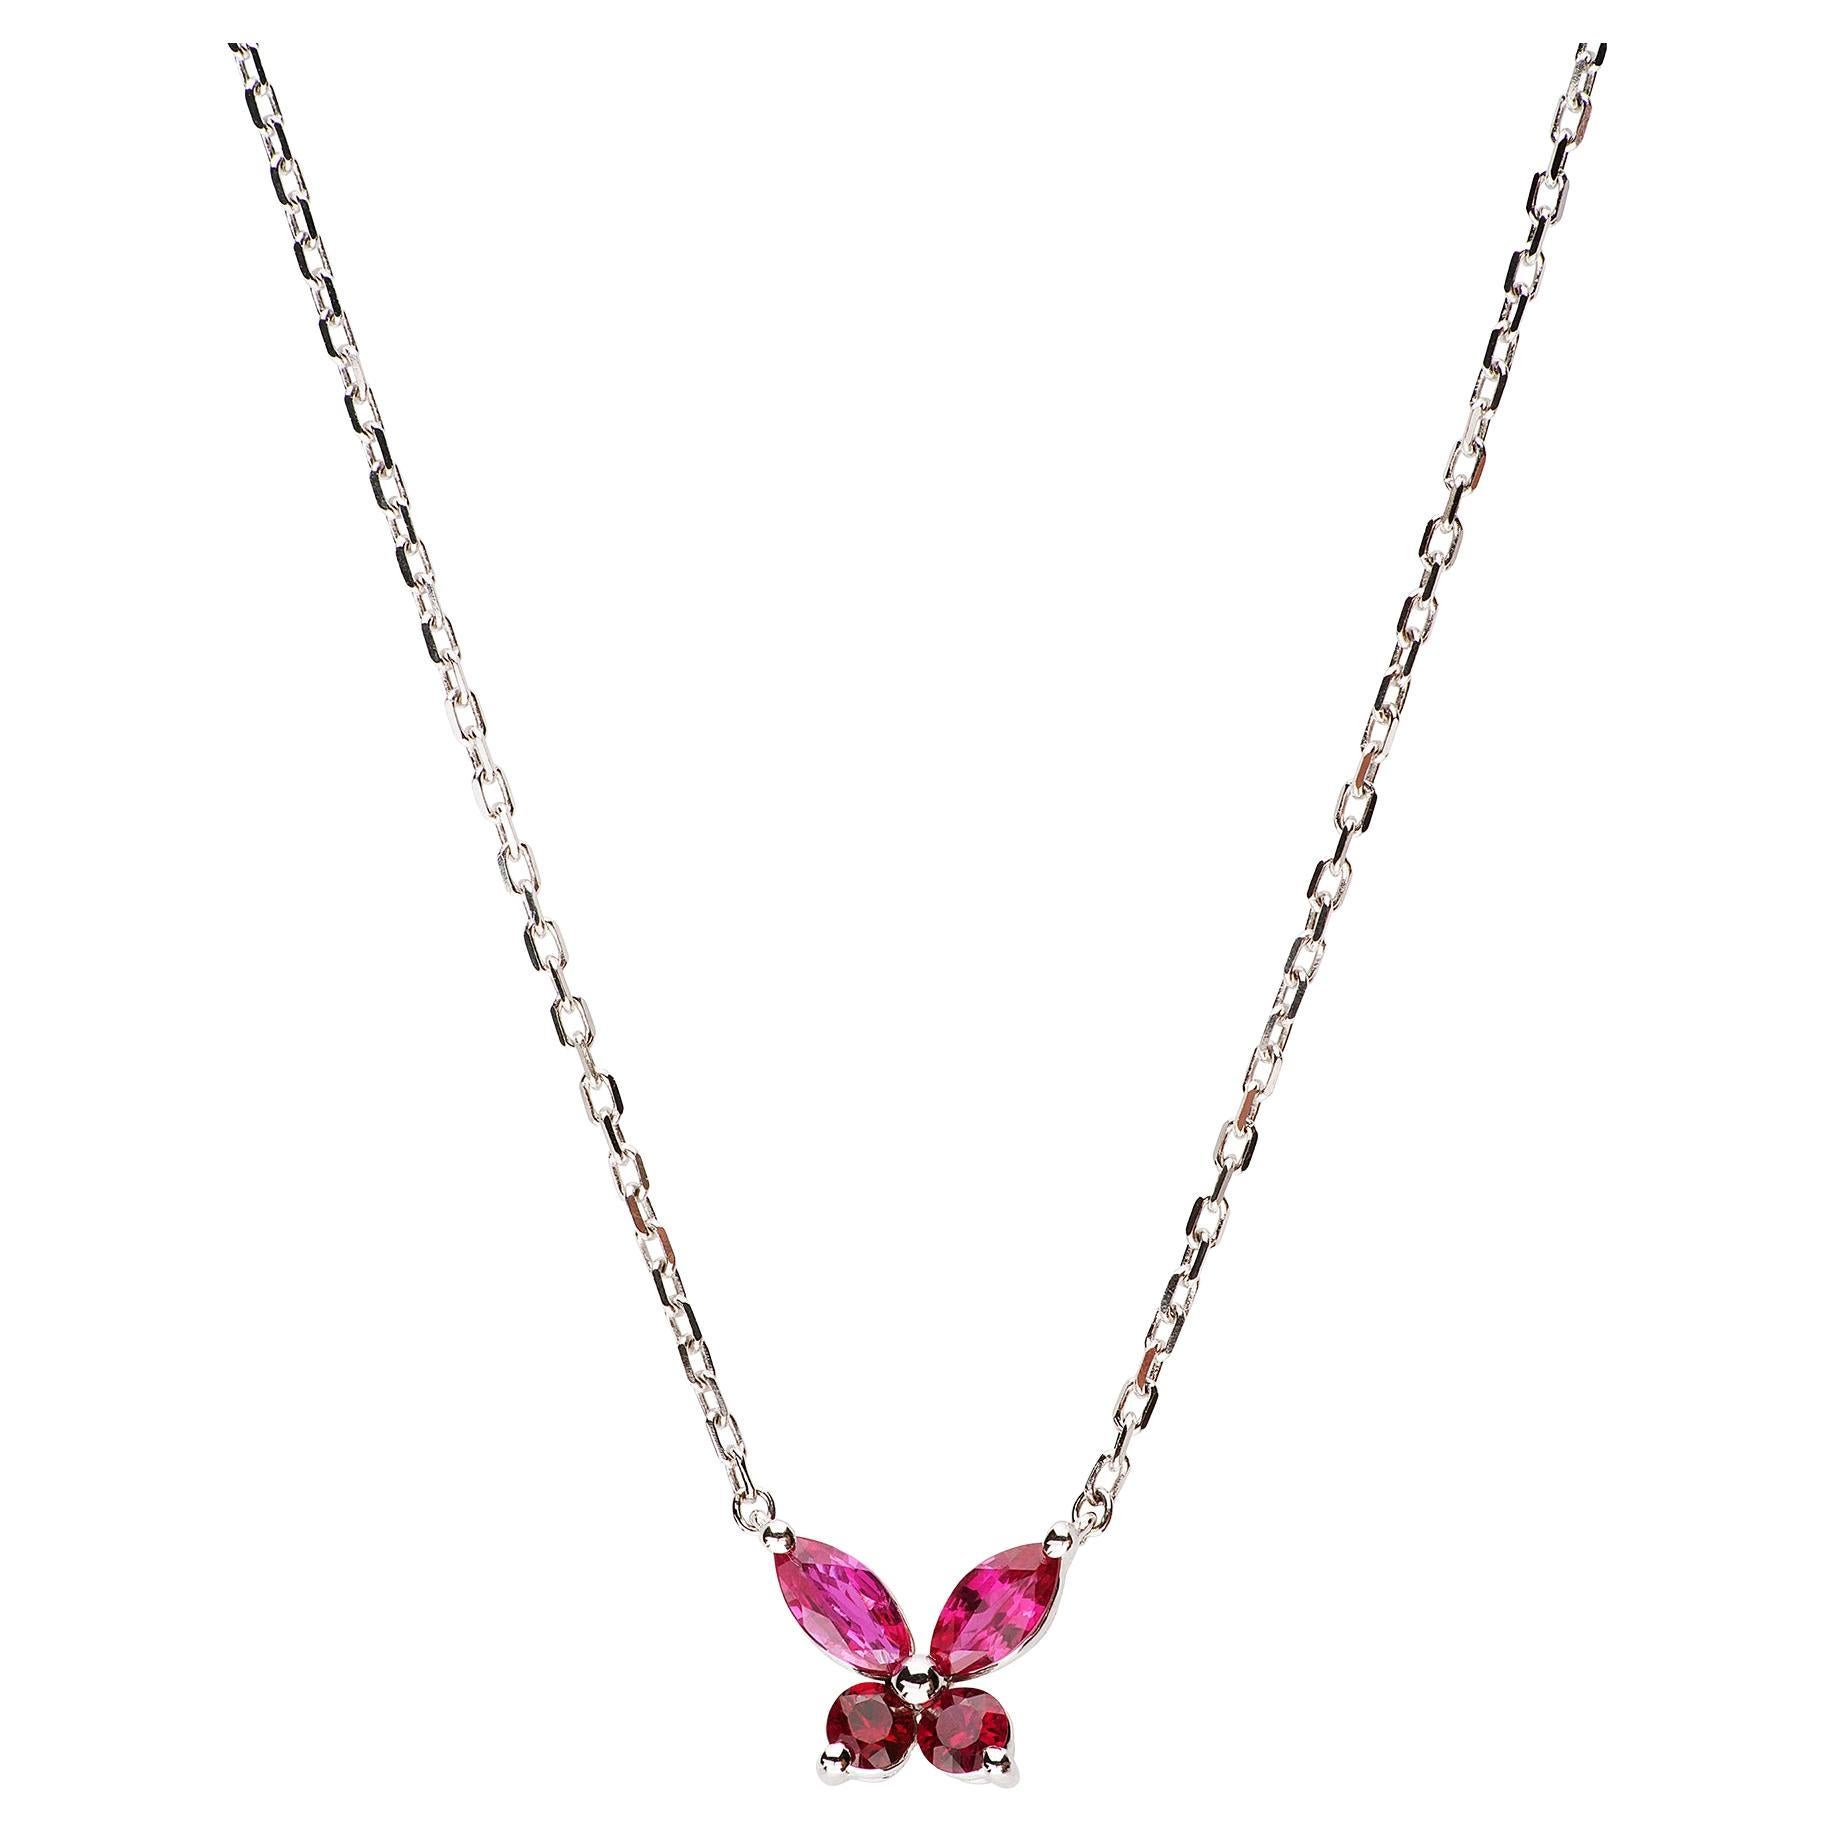 18 Carat White Gold, Butterfly Pendant Necklace with Rubies, Leonori Jewel For Sale